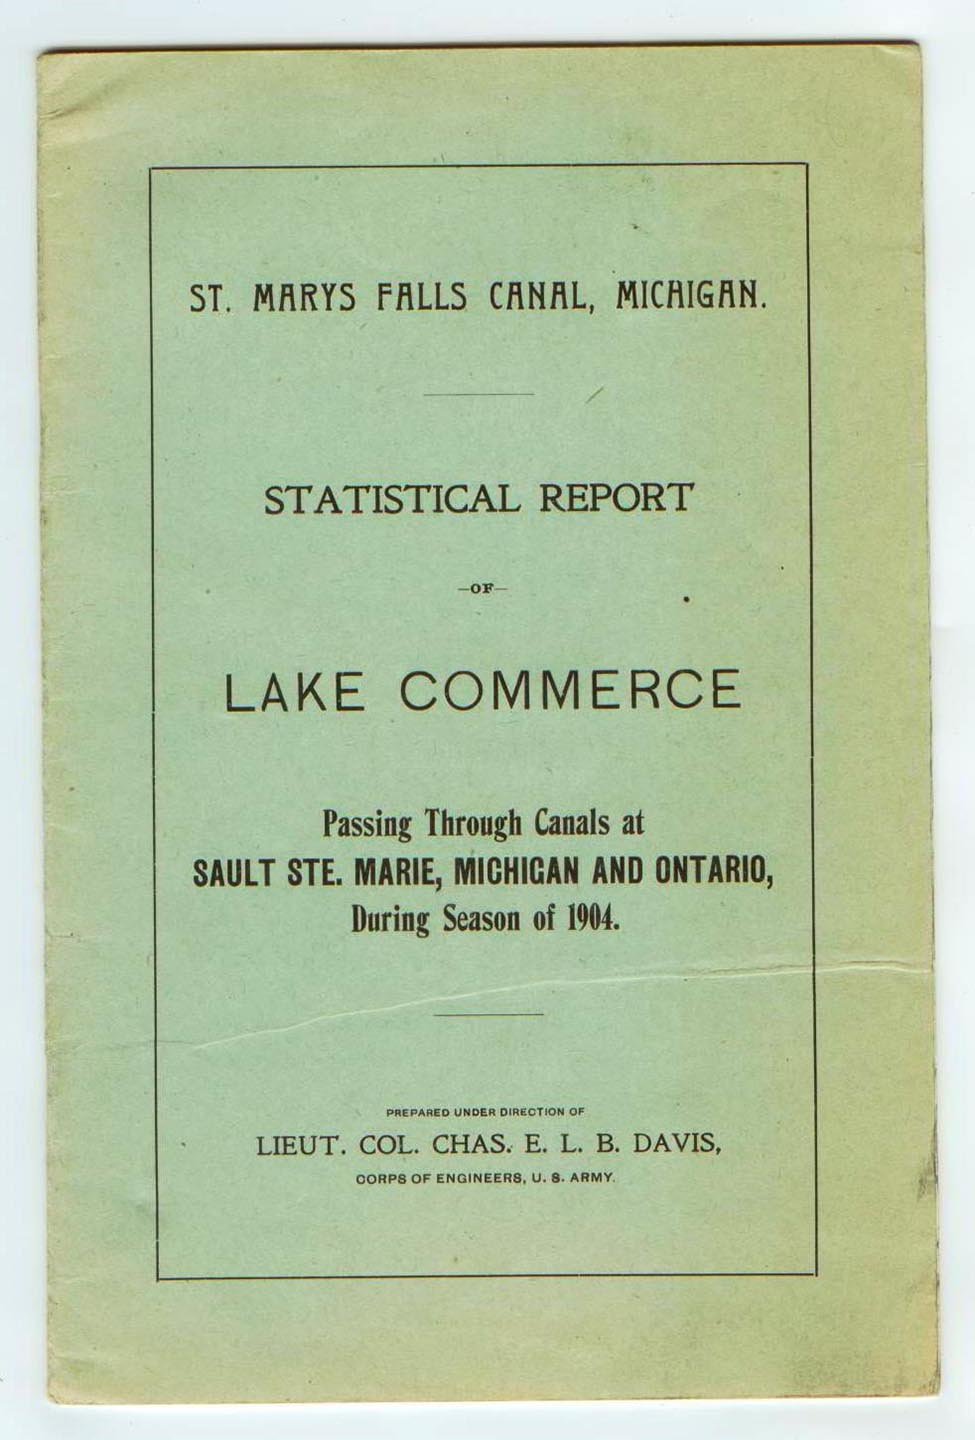 Statistical Report of Lake Commerce Passing Through the American and Canadian Canals at Sault Ste. Marie, Michigan and Ontario, During the Season of 1904